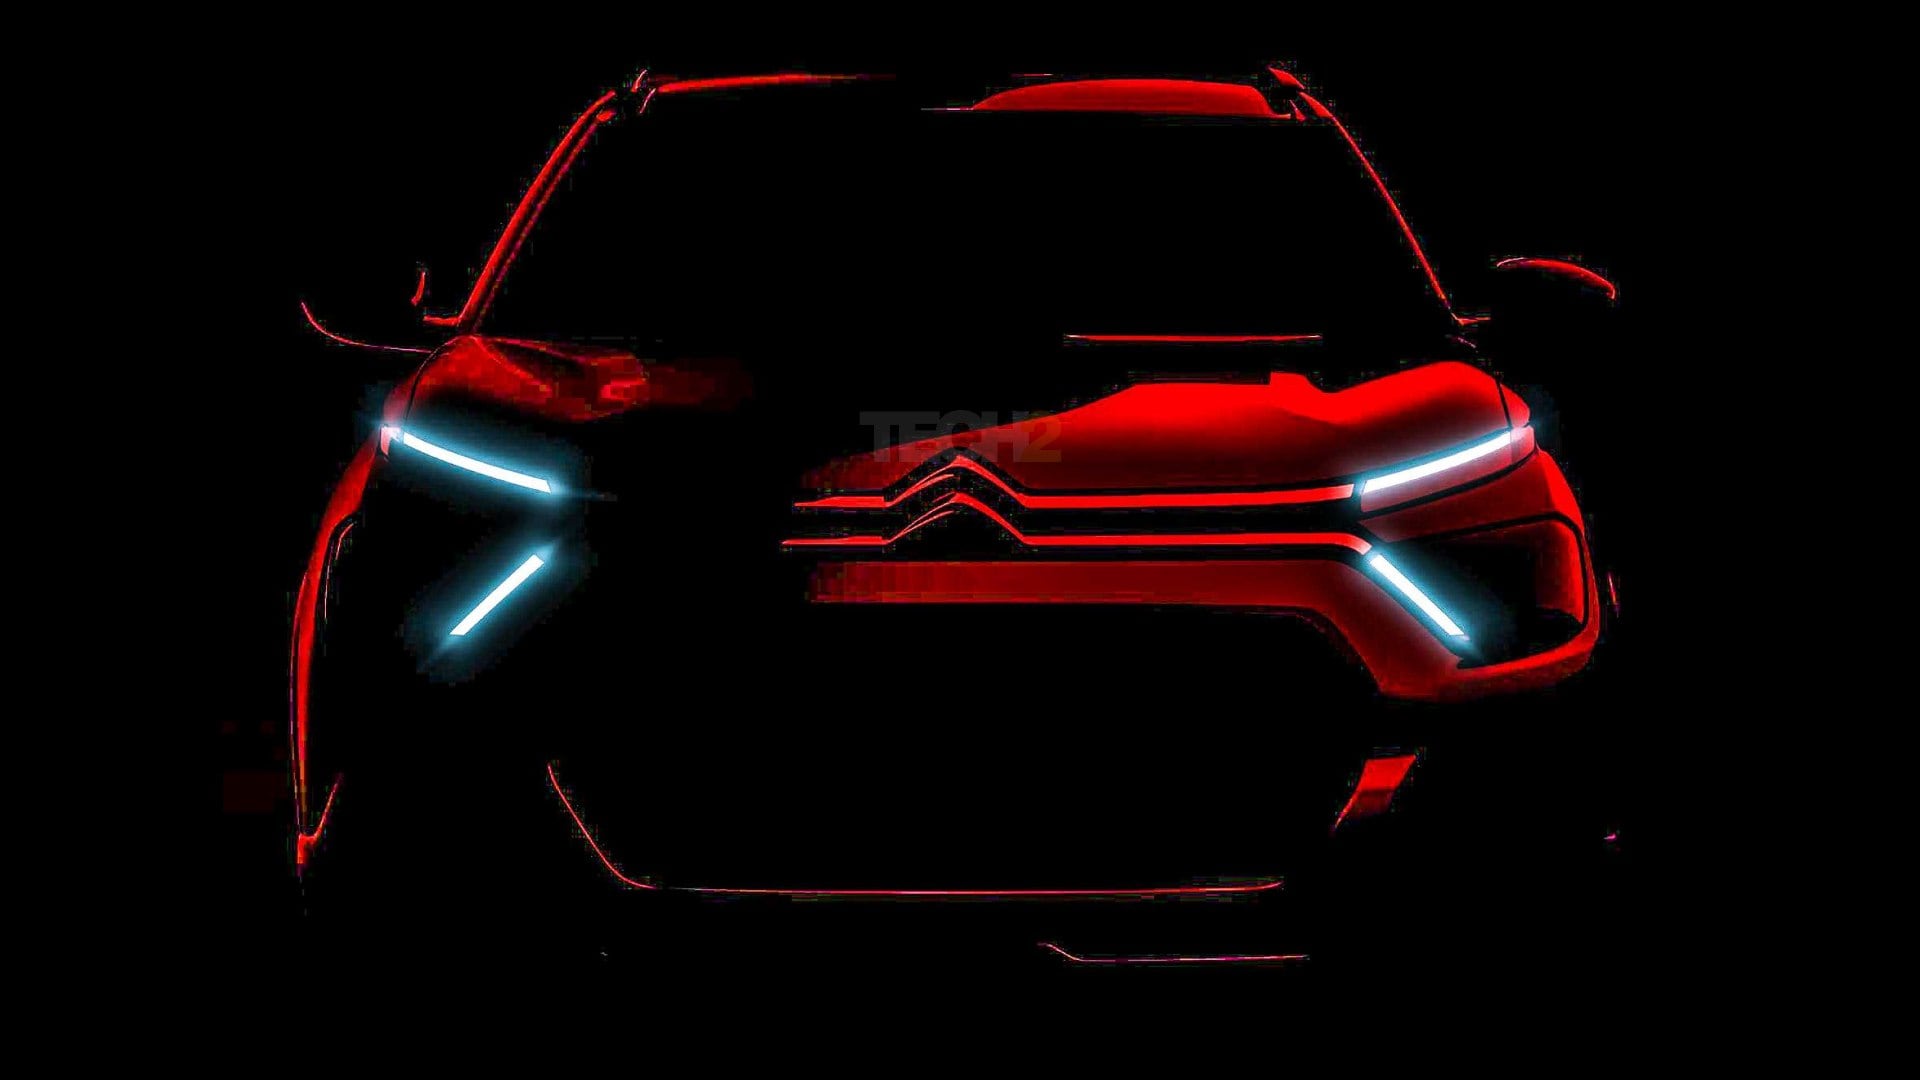 Chrome extensions emerging from iconic double chevron flow into the thin, X-shaped LED daytime running lights. Image: Citroen